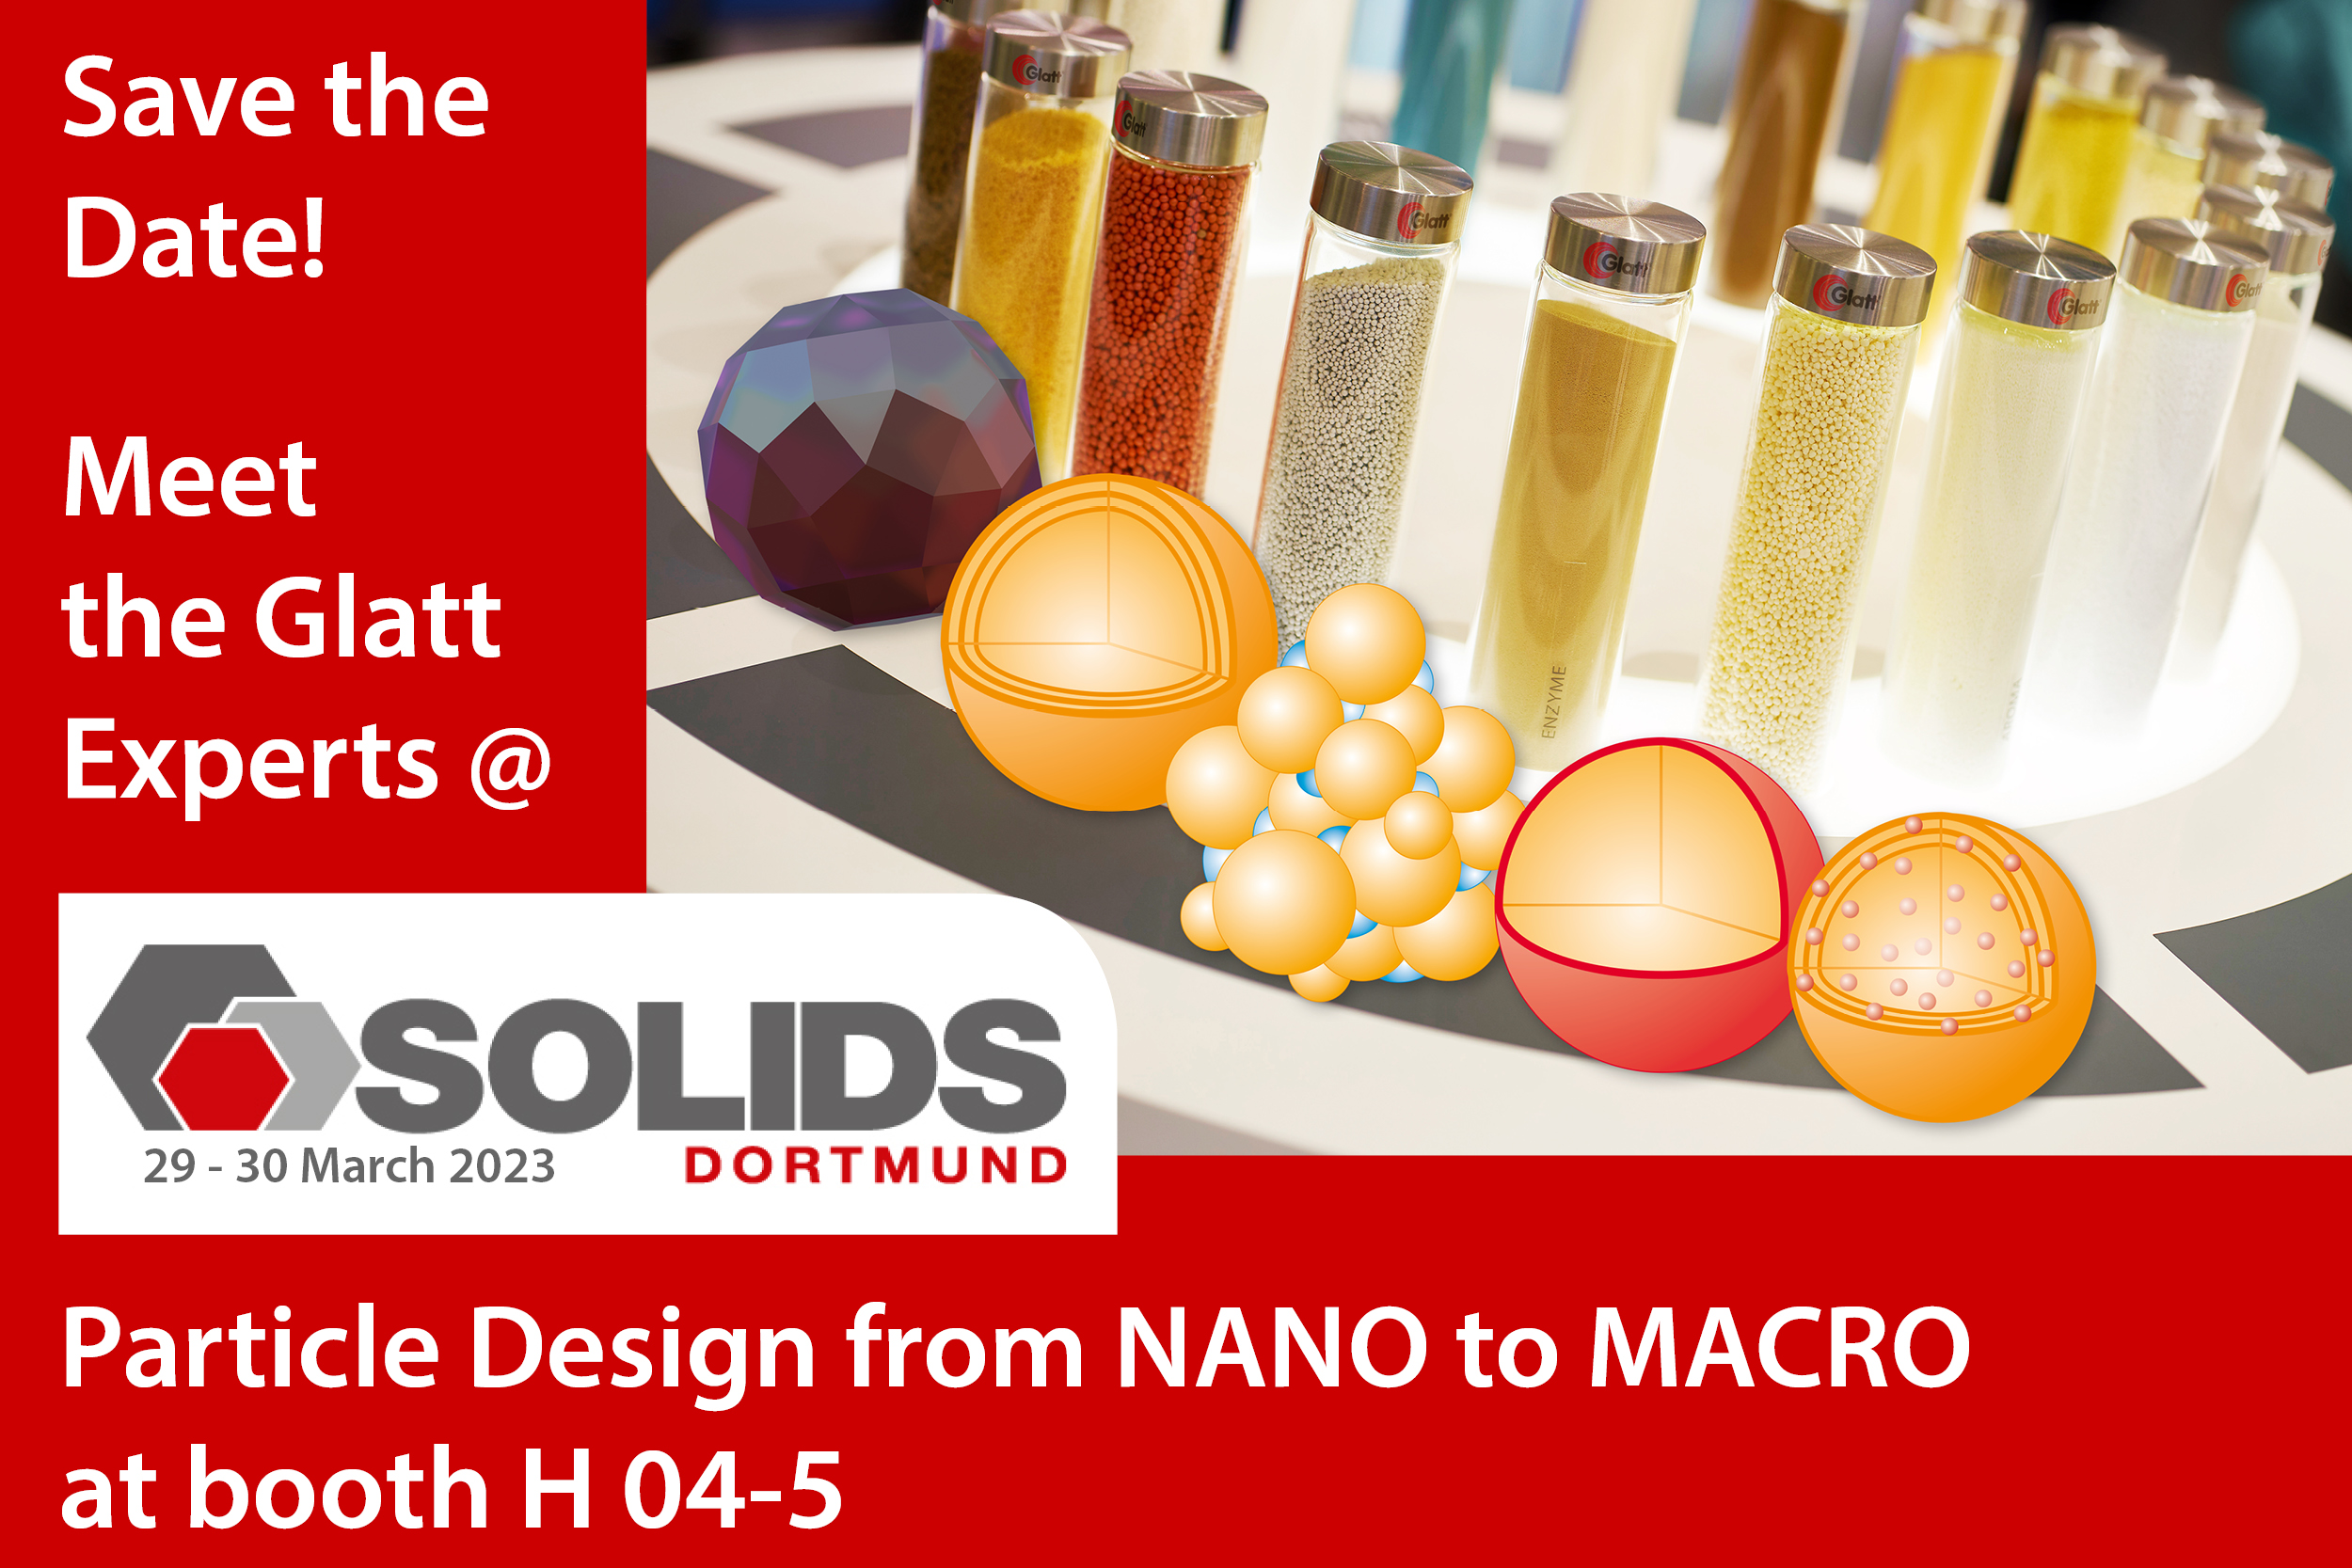 Meet the Glatt experts at SOLIDS from 29-30.03.2023 in Dortmund at booth H 04-5